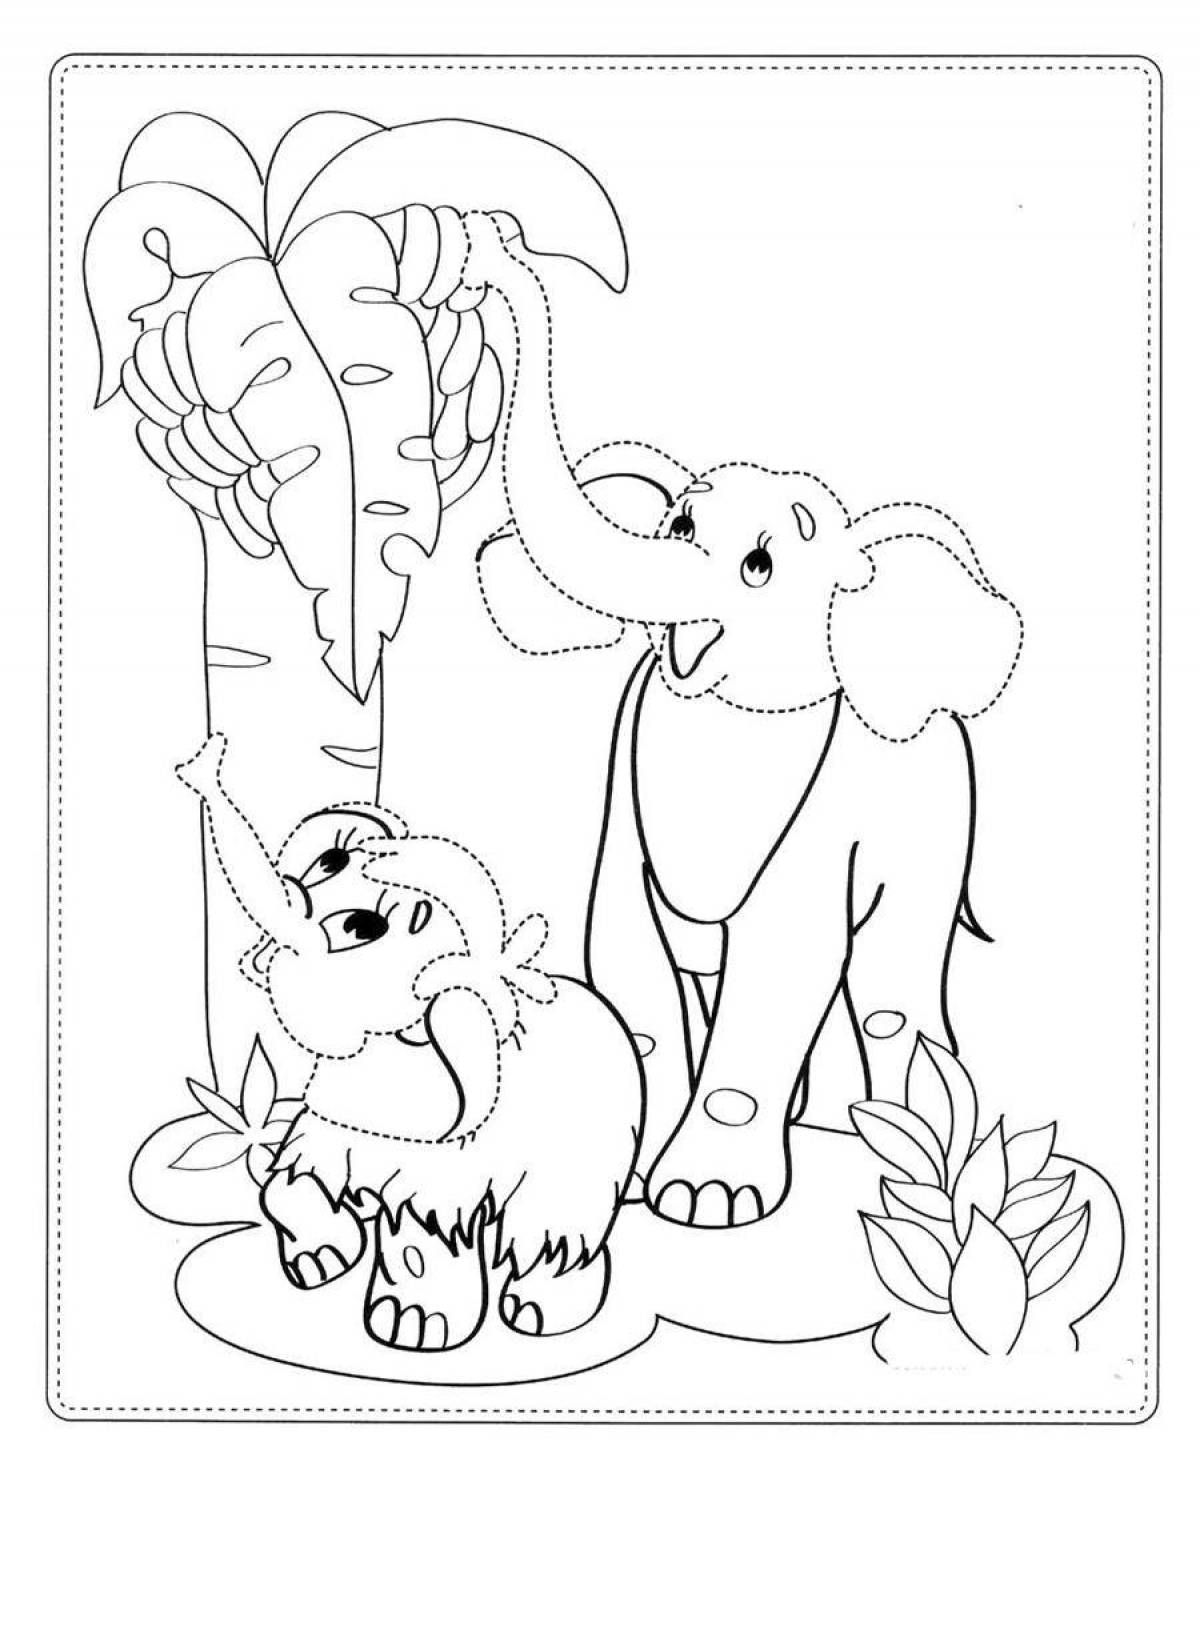 Adorable mammoth coloring page